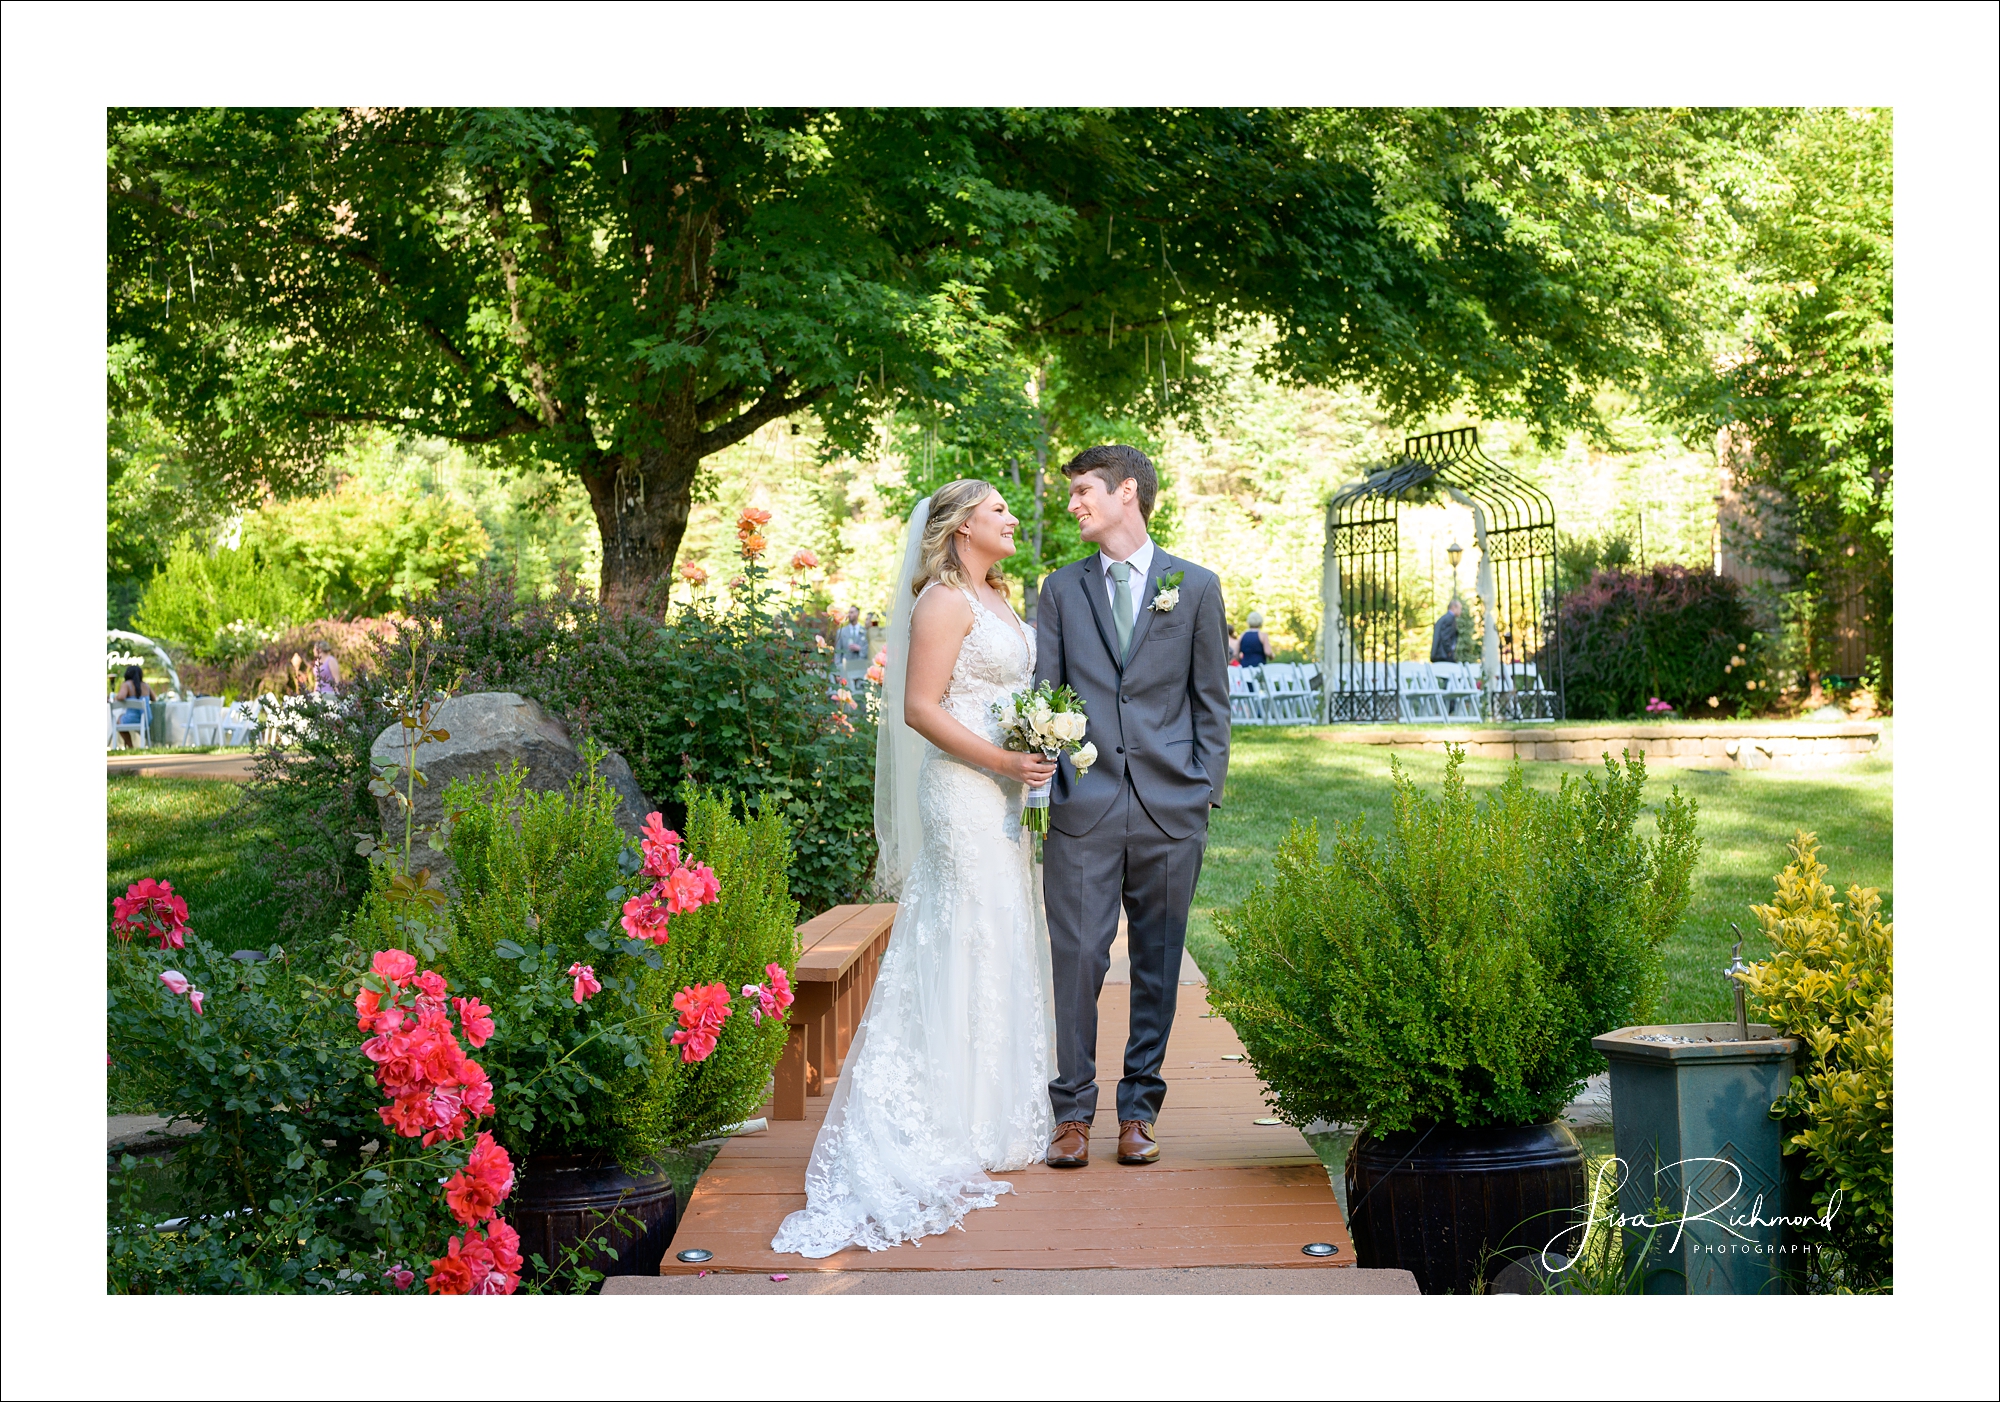 Lindsey and Adam <br> Silverthorn Meadows, Camino